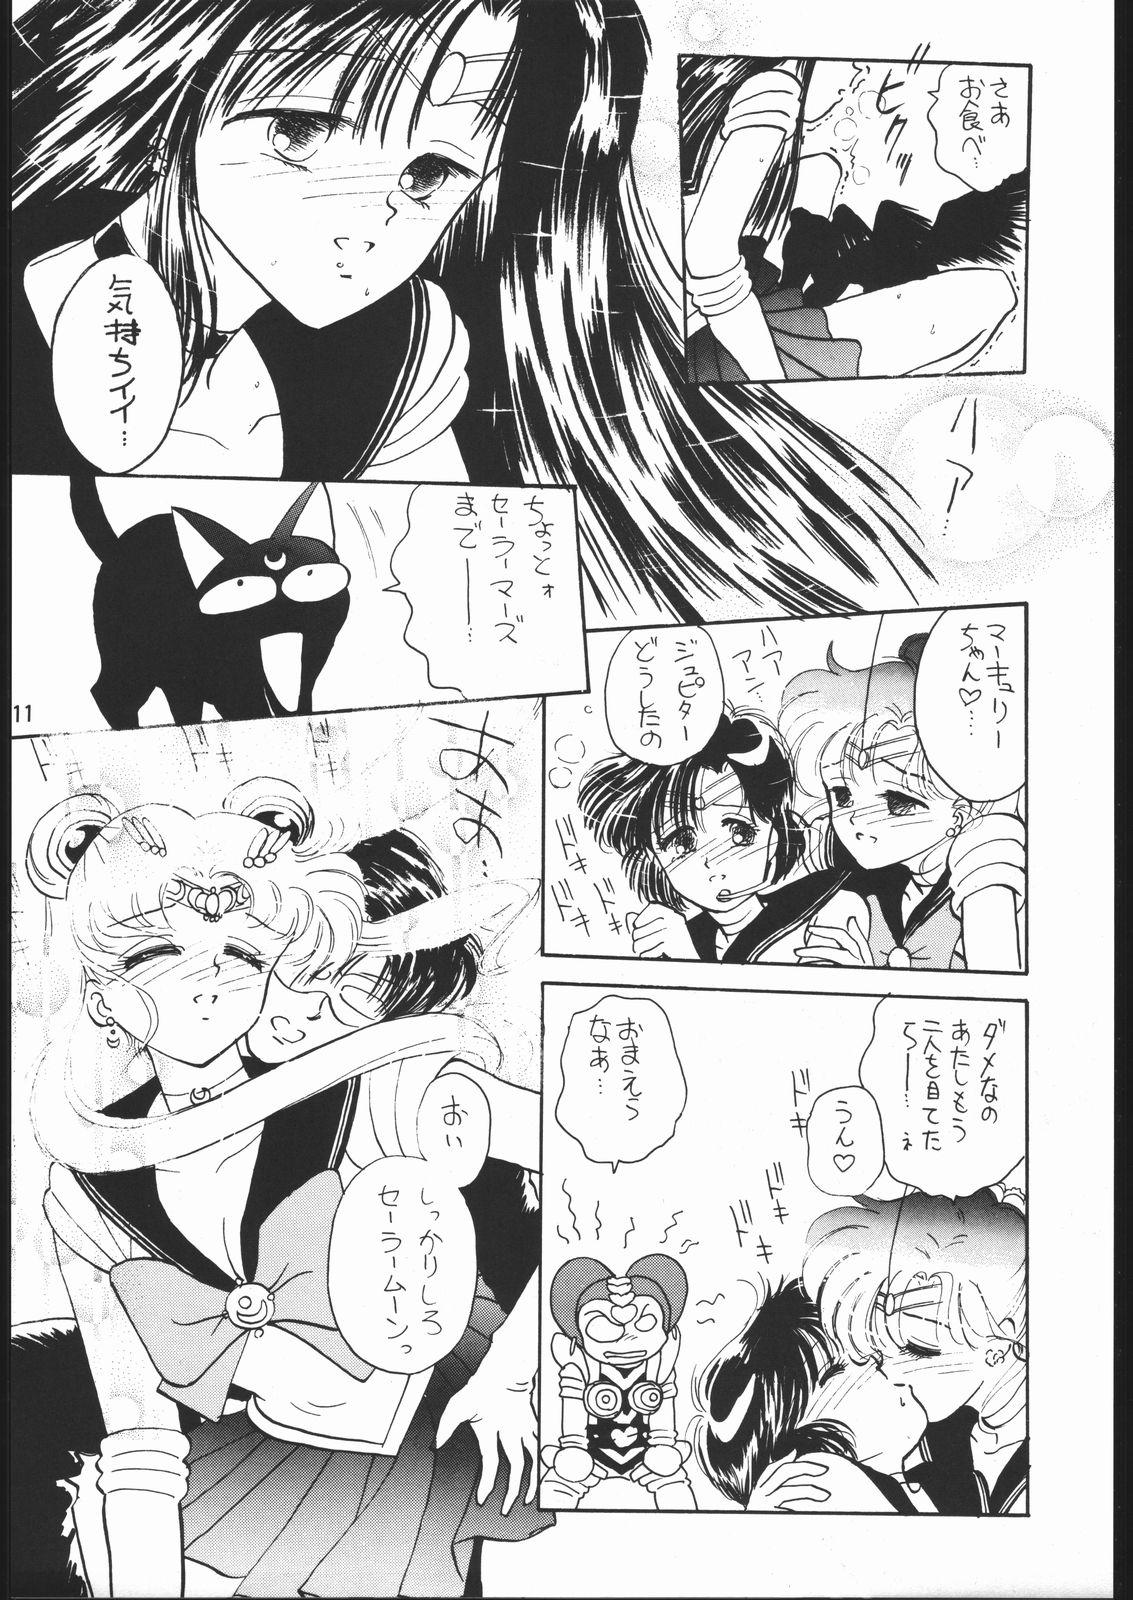 Thuylinh うさぎがピョン!! - Sailor moon Eating Pussy - Page 10